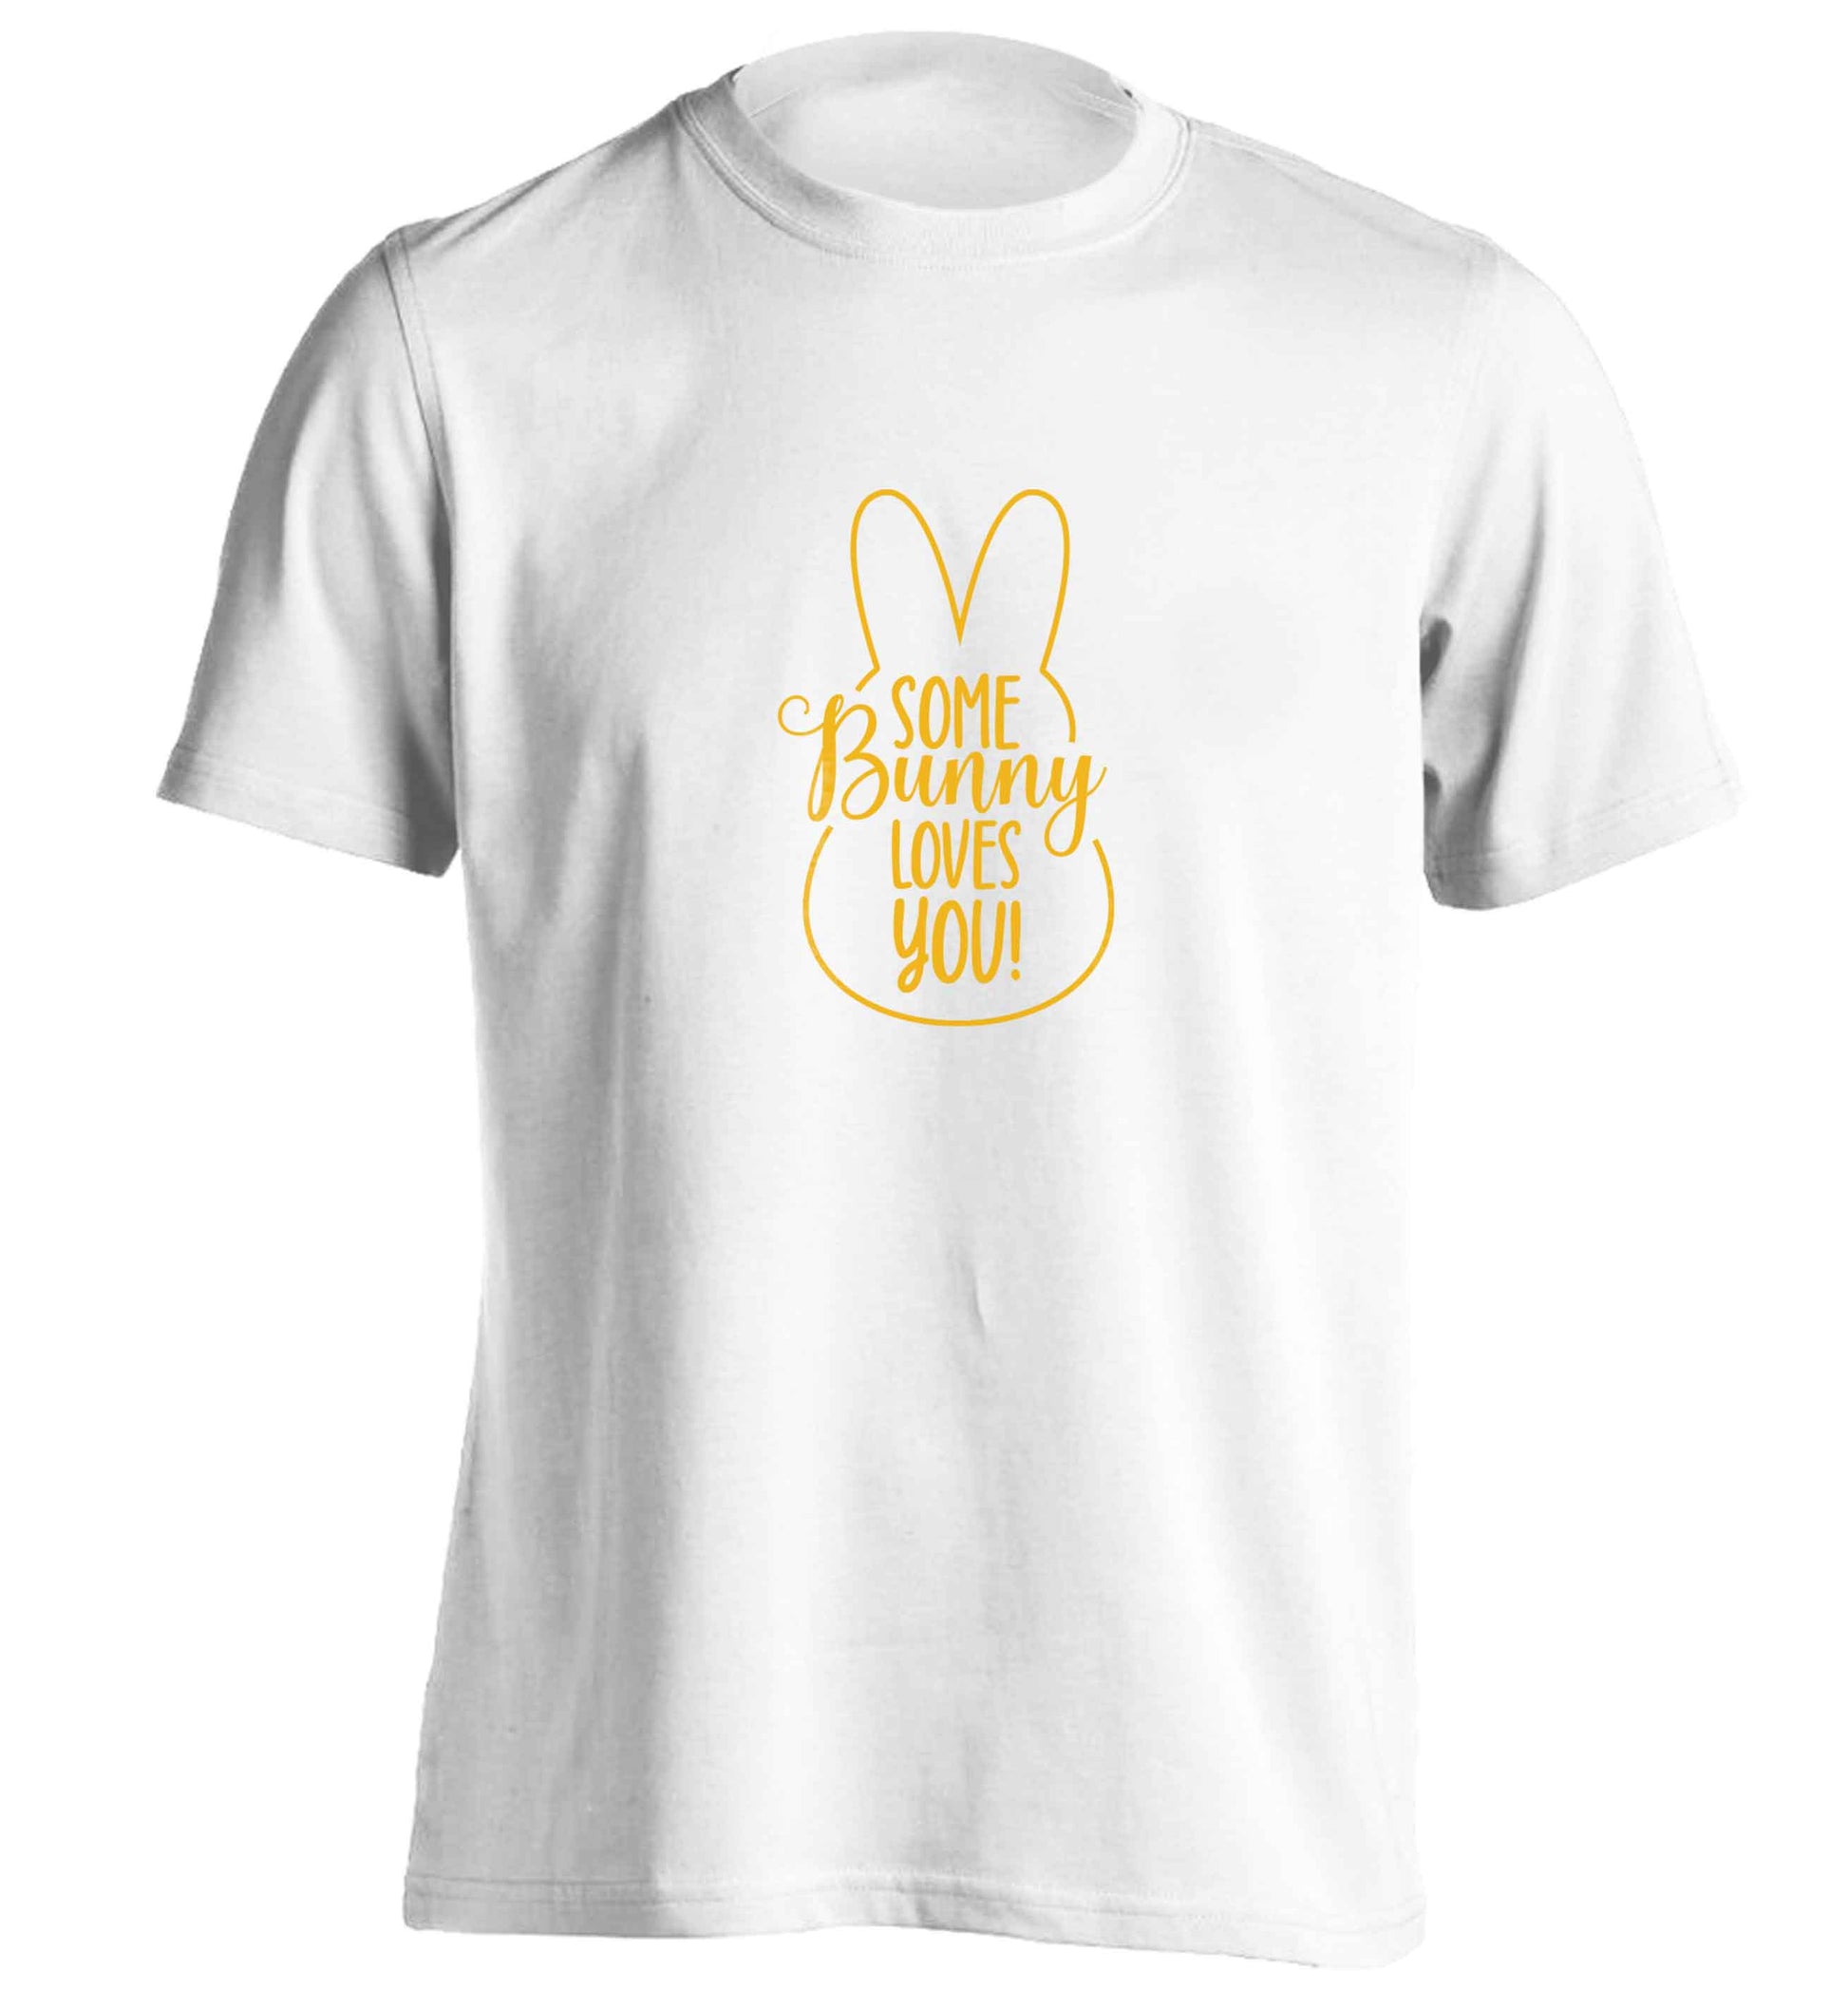 Some bunny loves you adults unisex white Tshirt 2XL